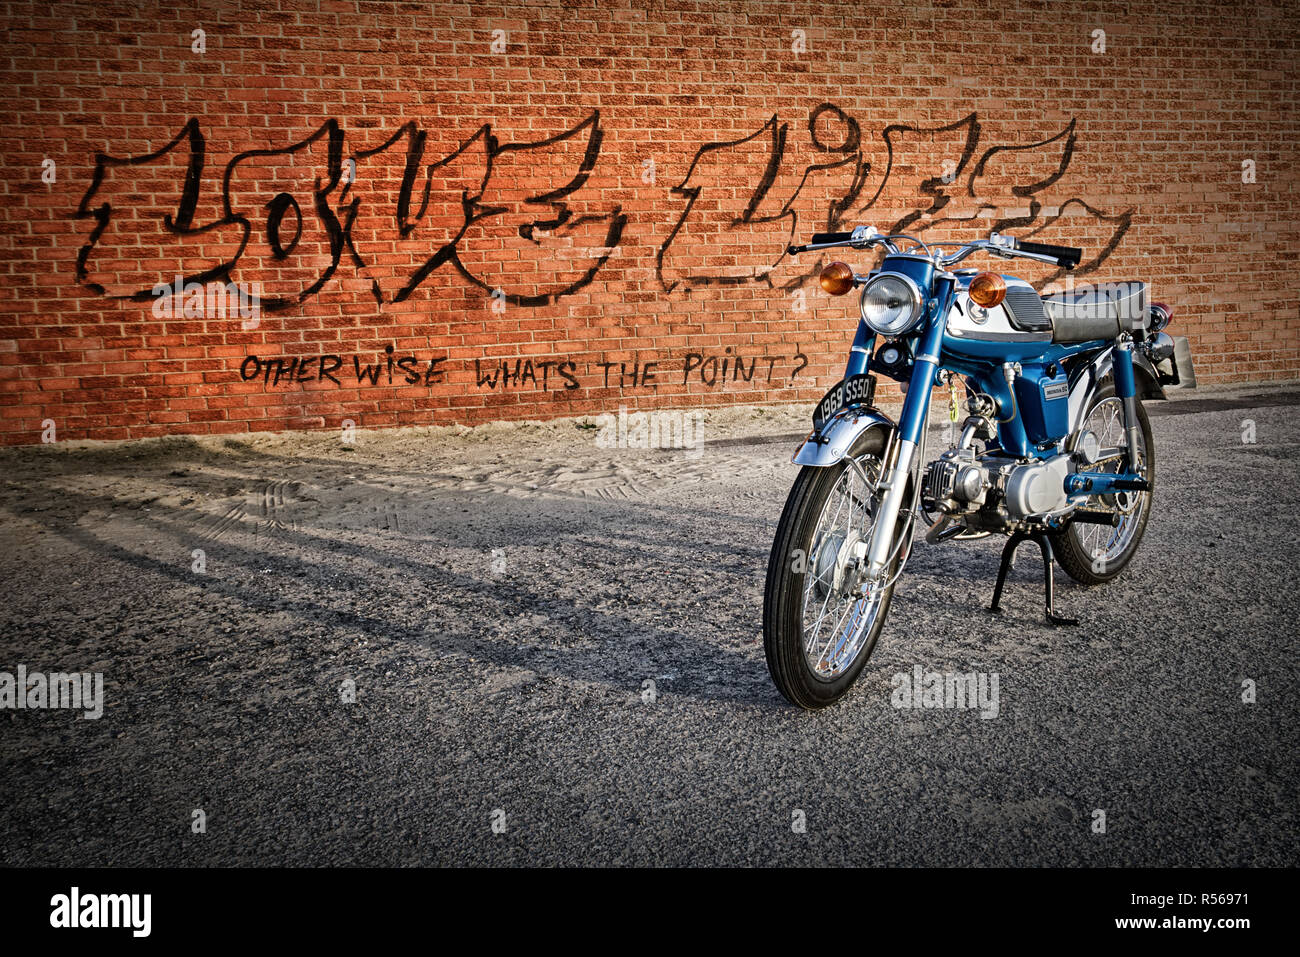 1969 Honda SS50 50cc classic moped or motorcycle Sixteener special with  background graffiti on a wall quote love life otherwise whats the point!  Stock Photo - Alamy